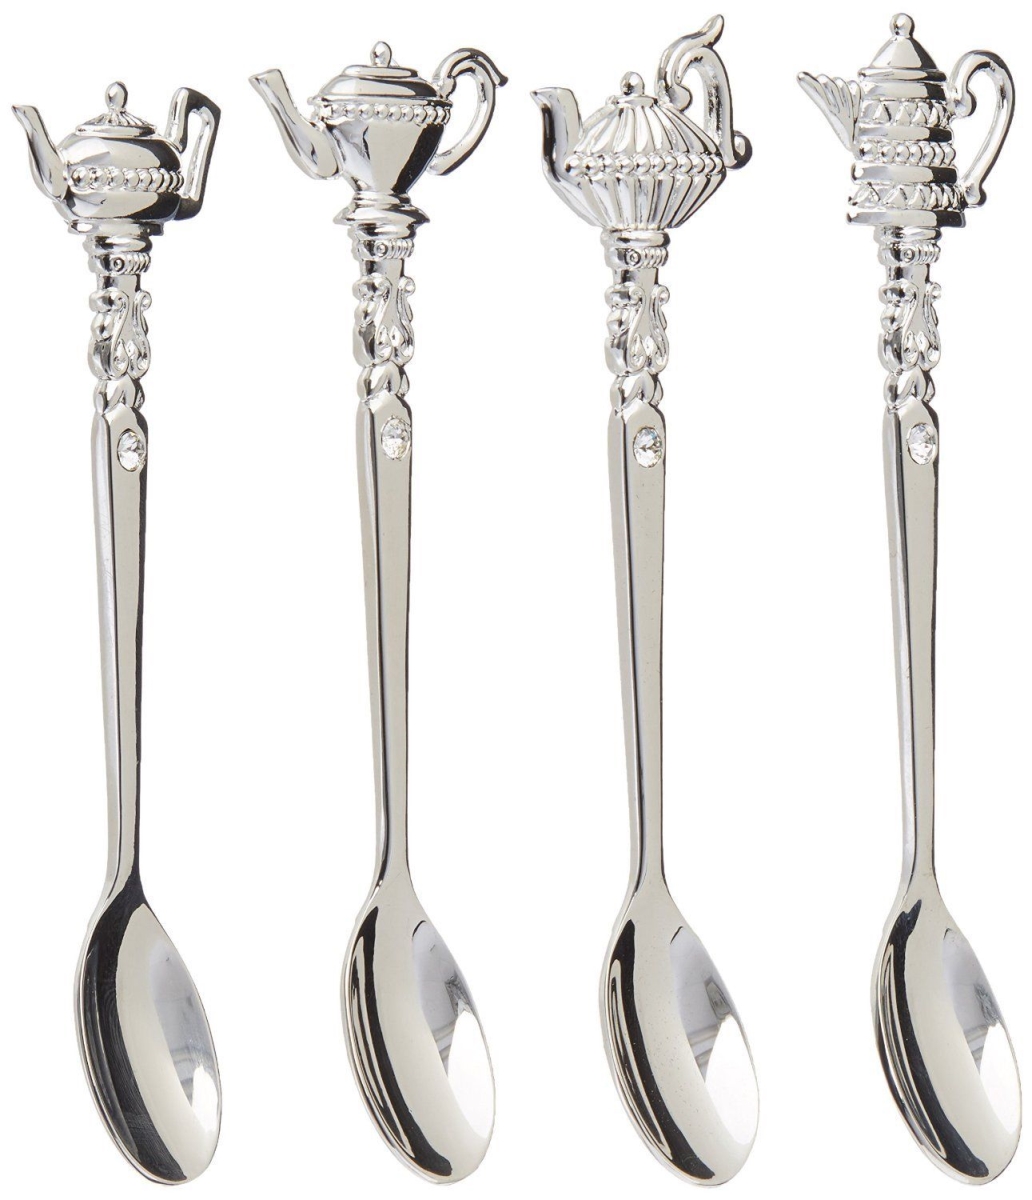 87625 Silver Plated Teapot Spoons With Crystal - Set Of 4